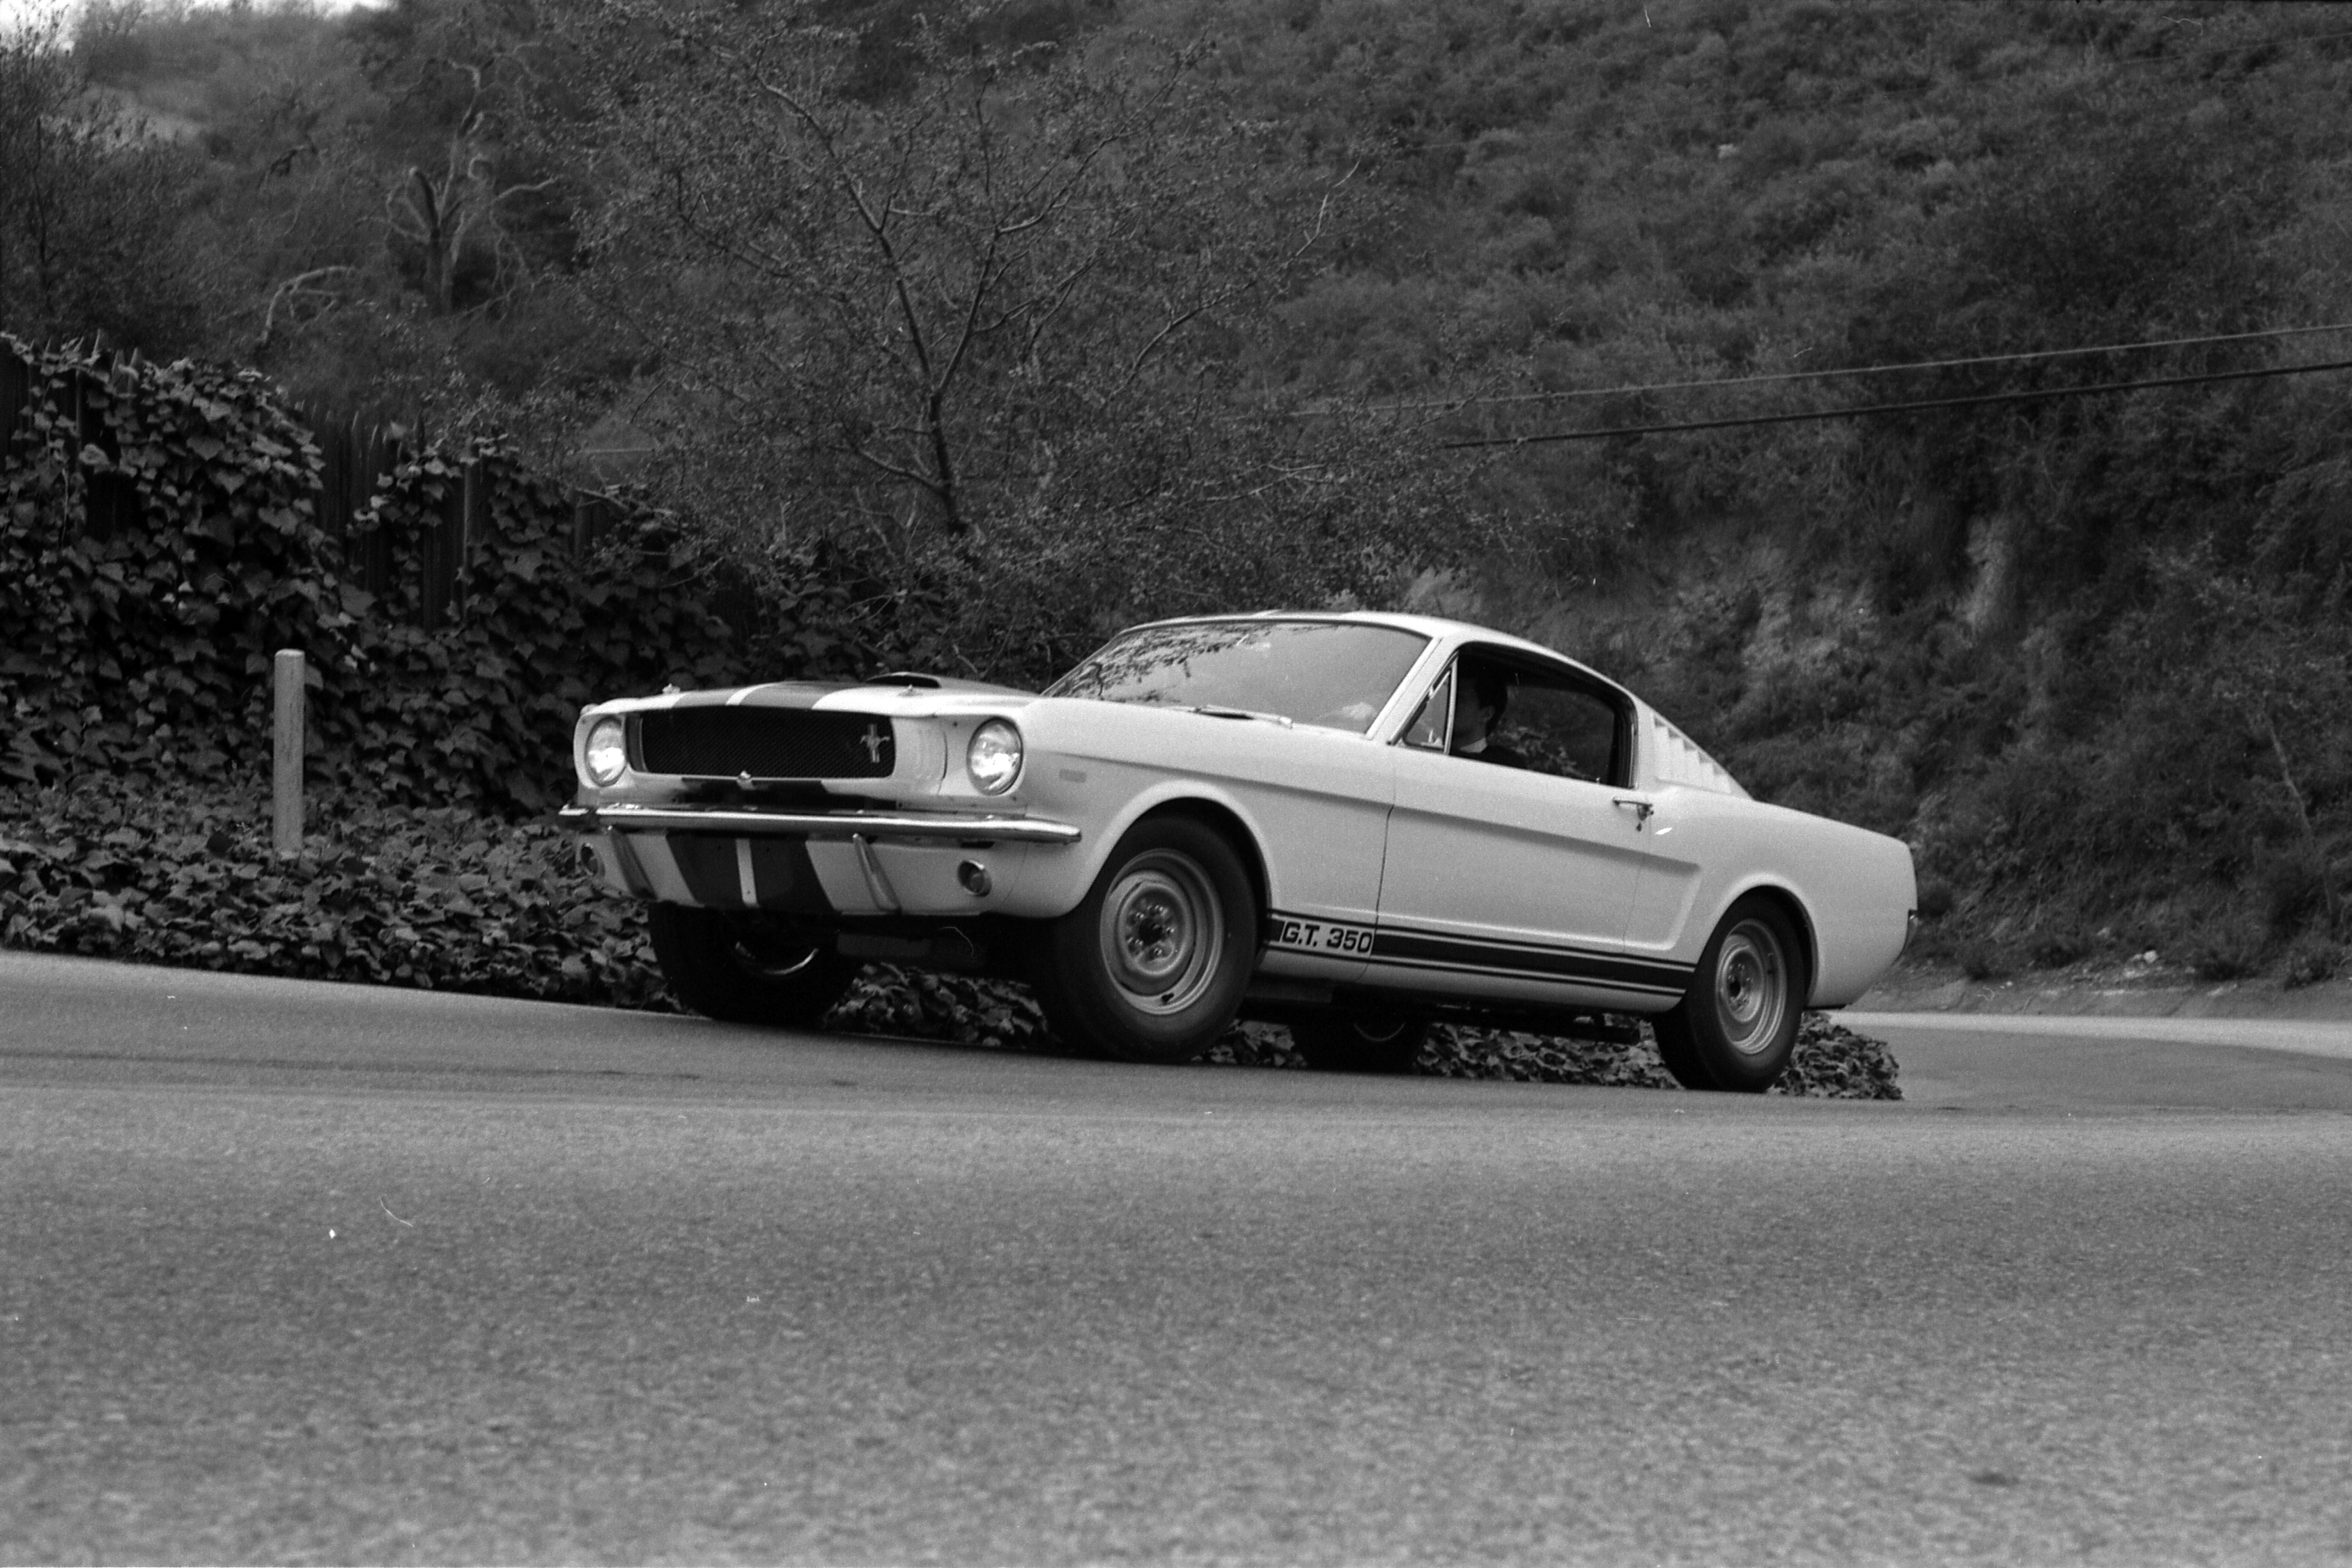 Original Shelby GT350 Mustang Prototypes - 1965 Ford Shelby GT350 Mustang prototype 5S003 during advertising photoshoot, showing stock steel wheels on driver’s side